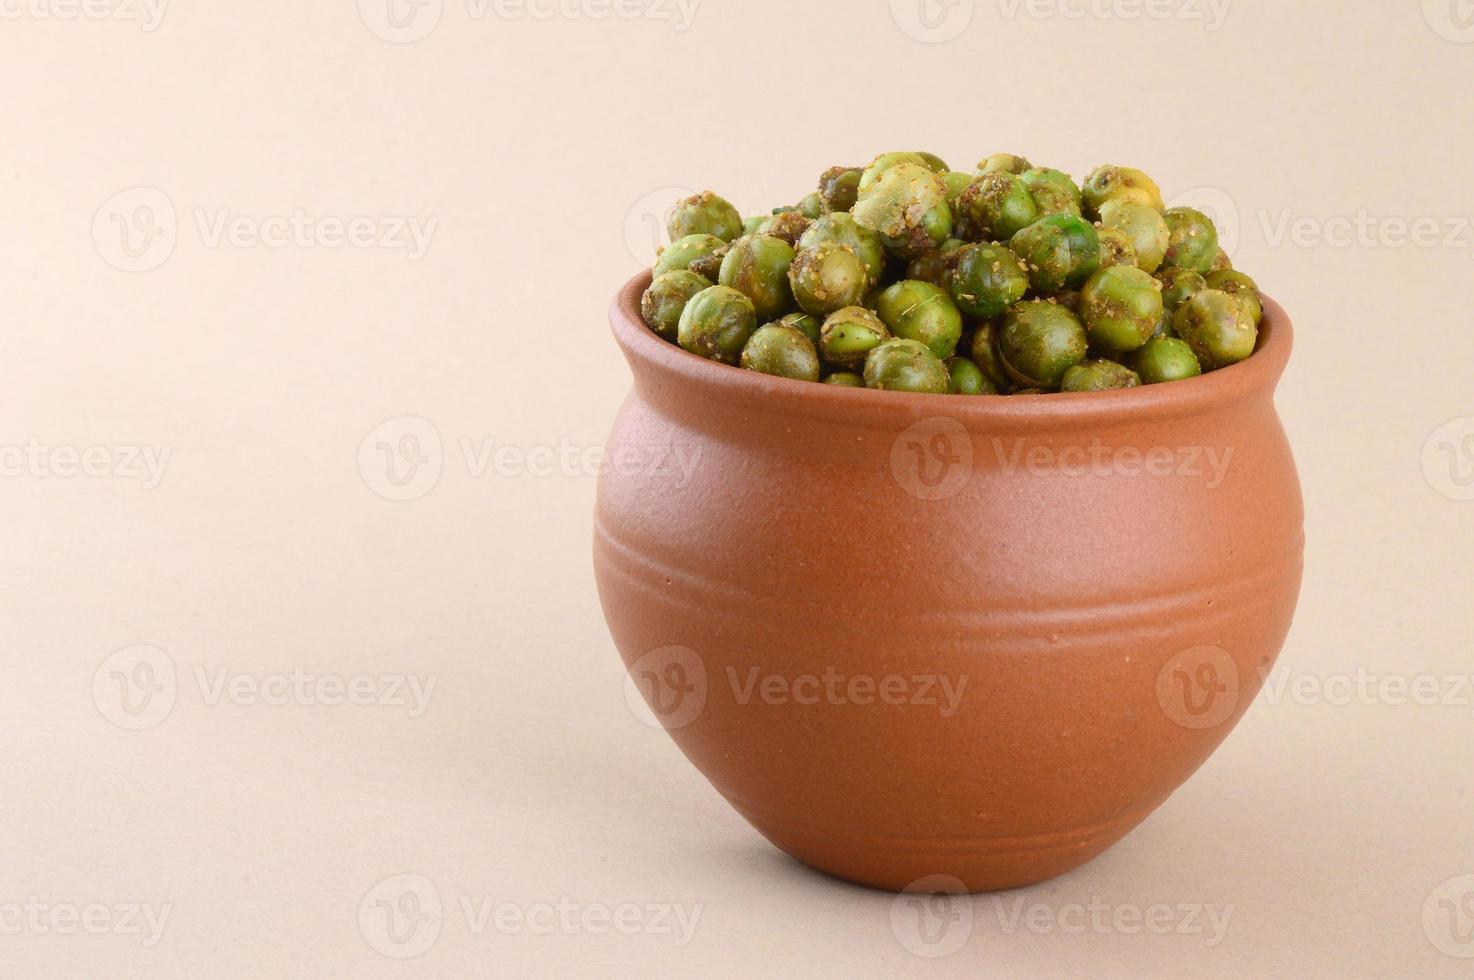 Spiced fried green peas, chatpata matar Indian snack. Dried salted green peas in clay pot. photo